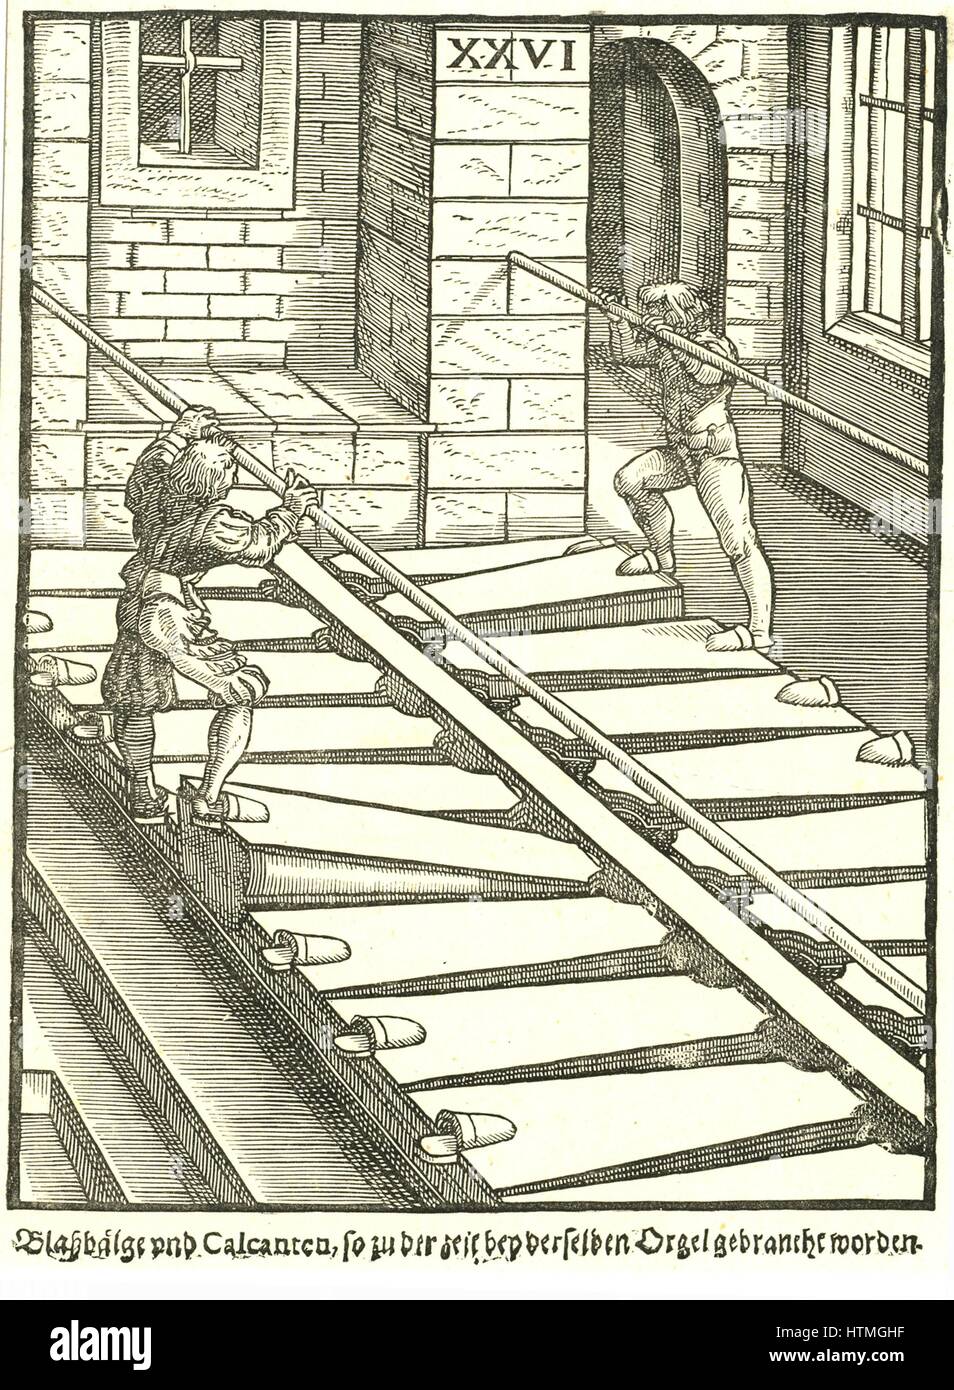 Bellows of a large organ, showing blowers working the bellows. Woodcut from Michael Praetorius 'Syntagma Musicum', 1615-1620. Stock Photo